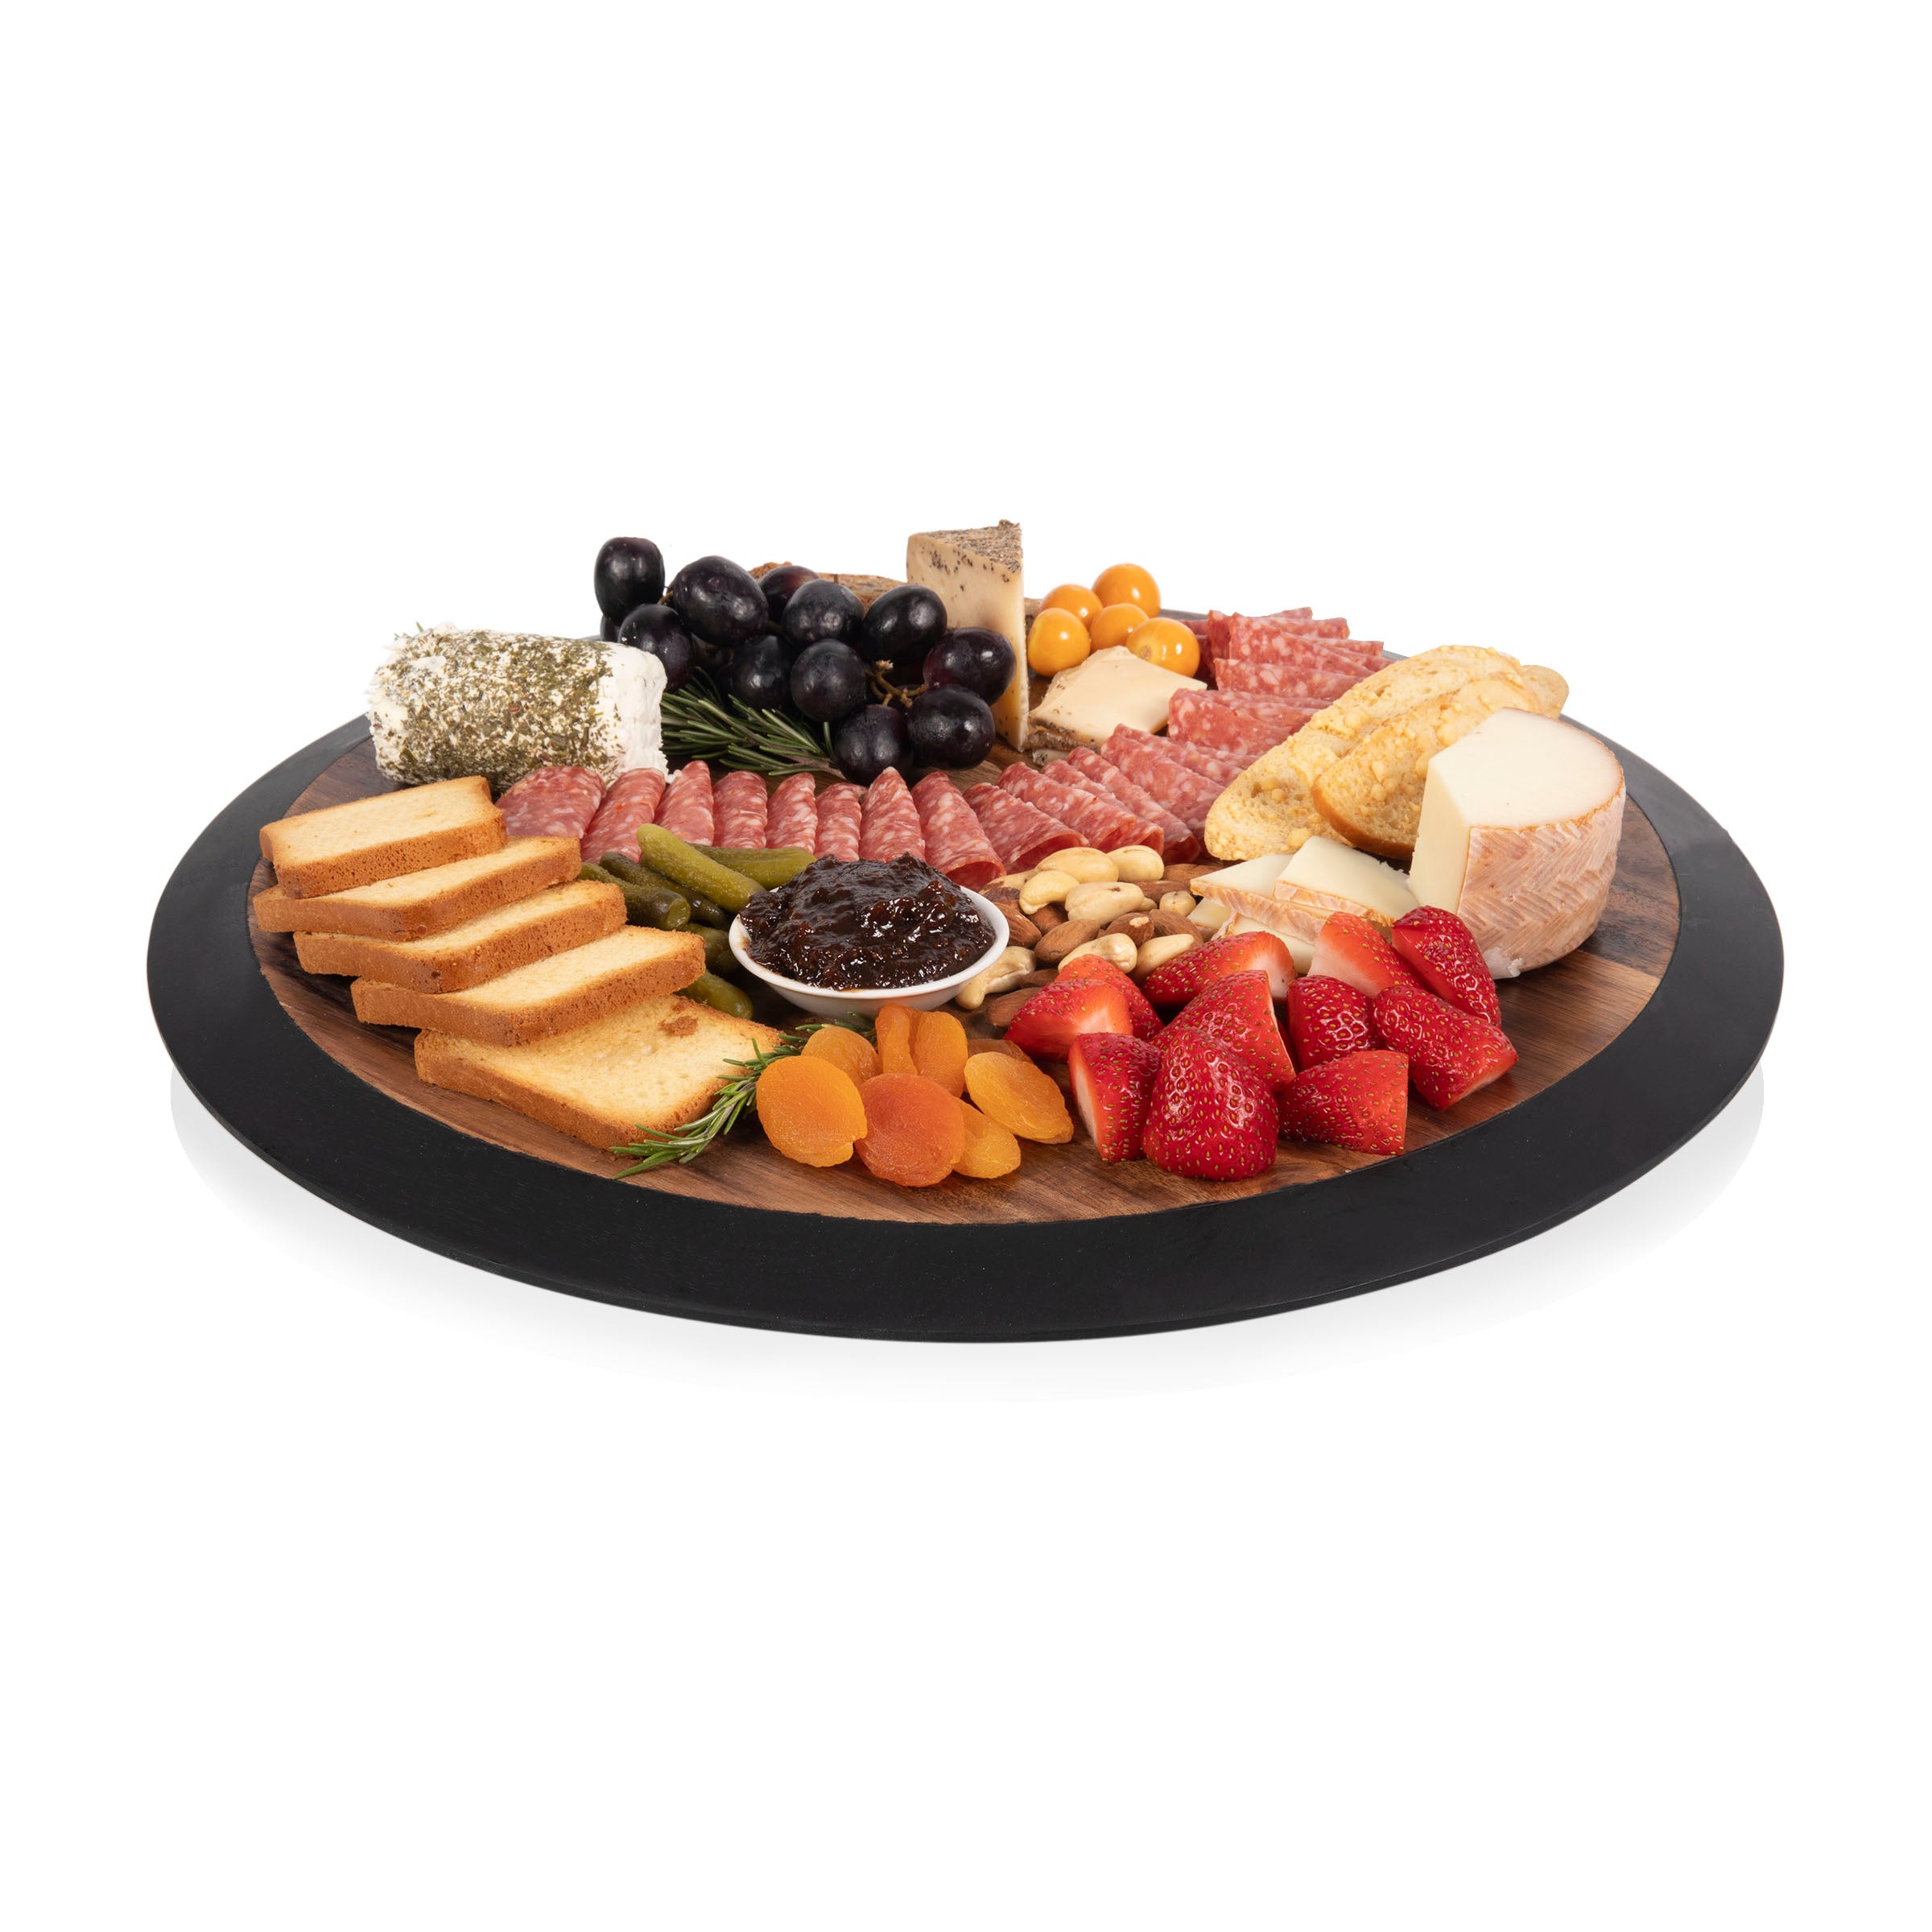 Indianapolis Colts - Lazy Susan Serving Tray